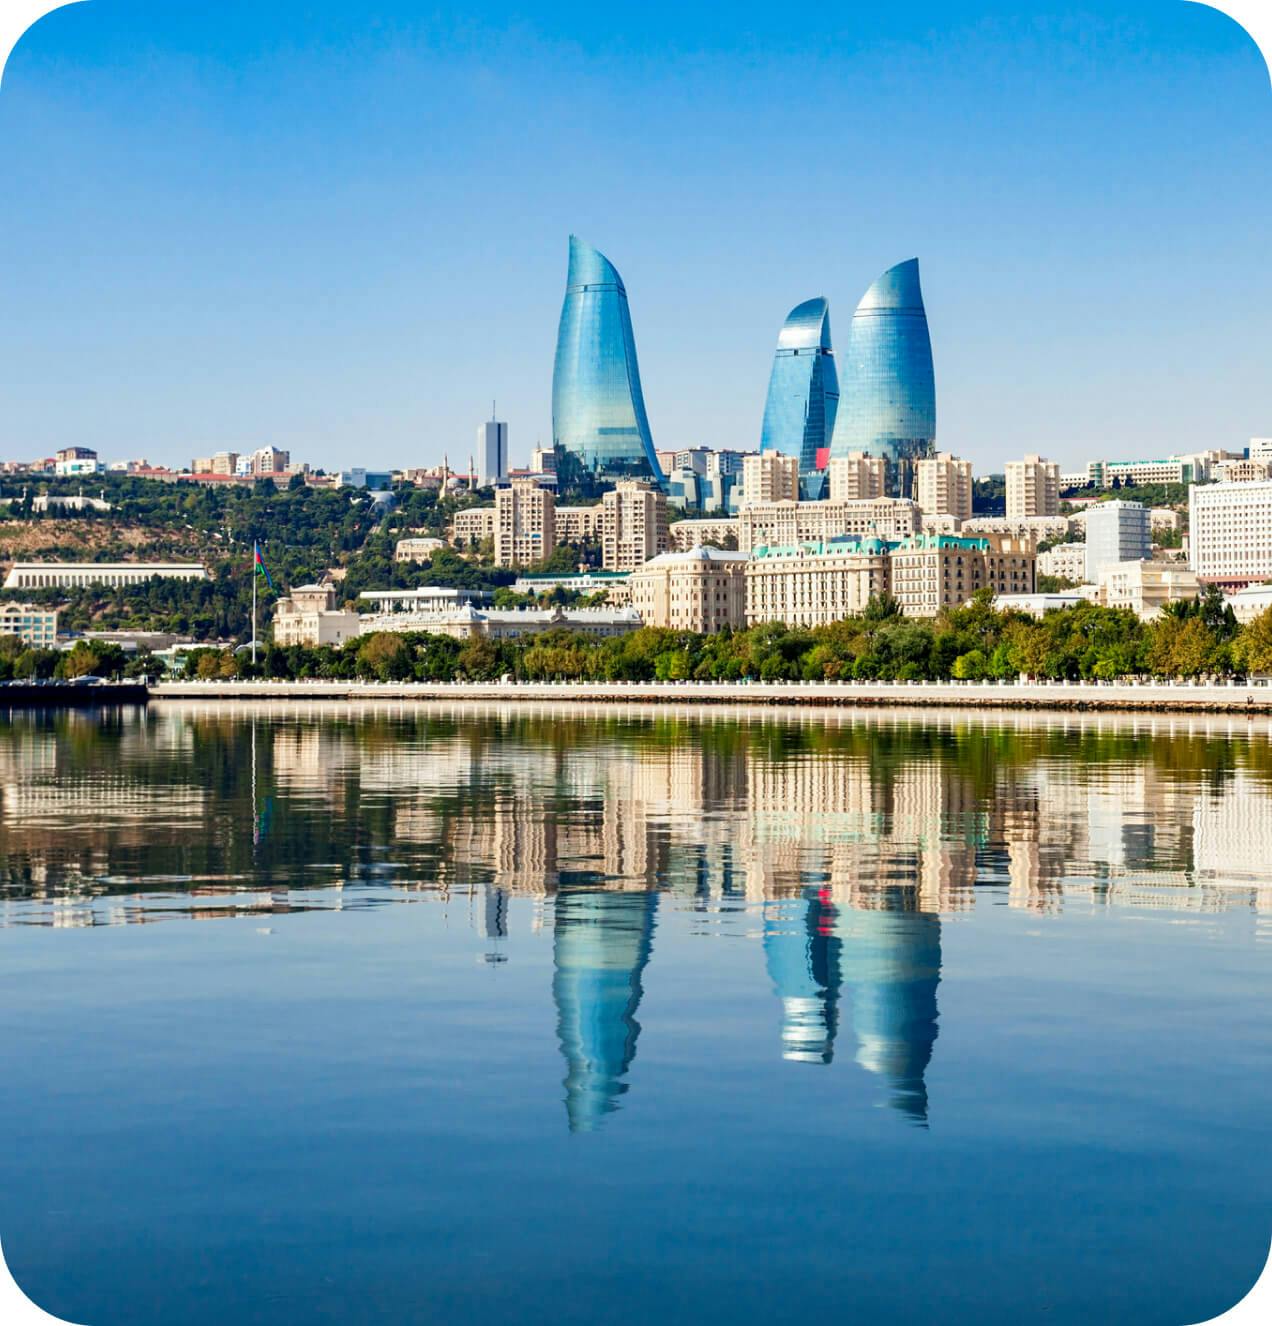 The city of baku is reflected in the water.